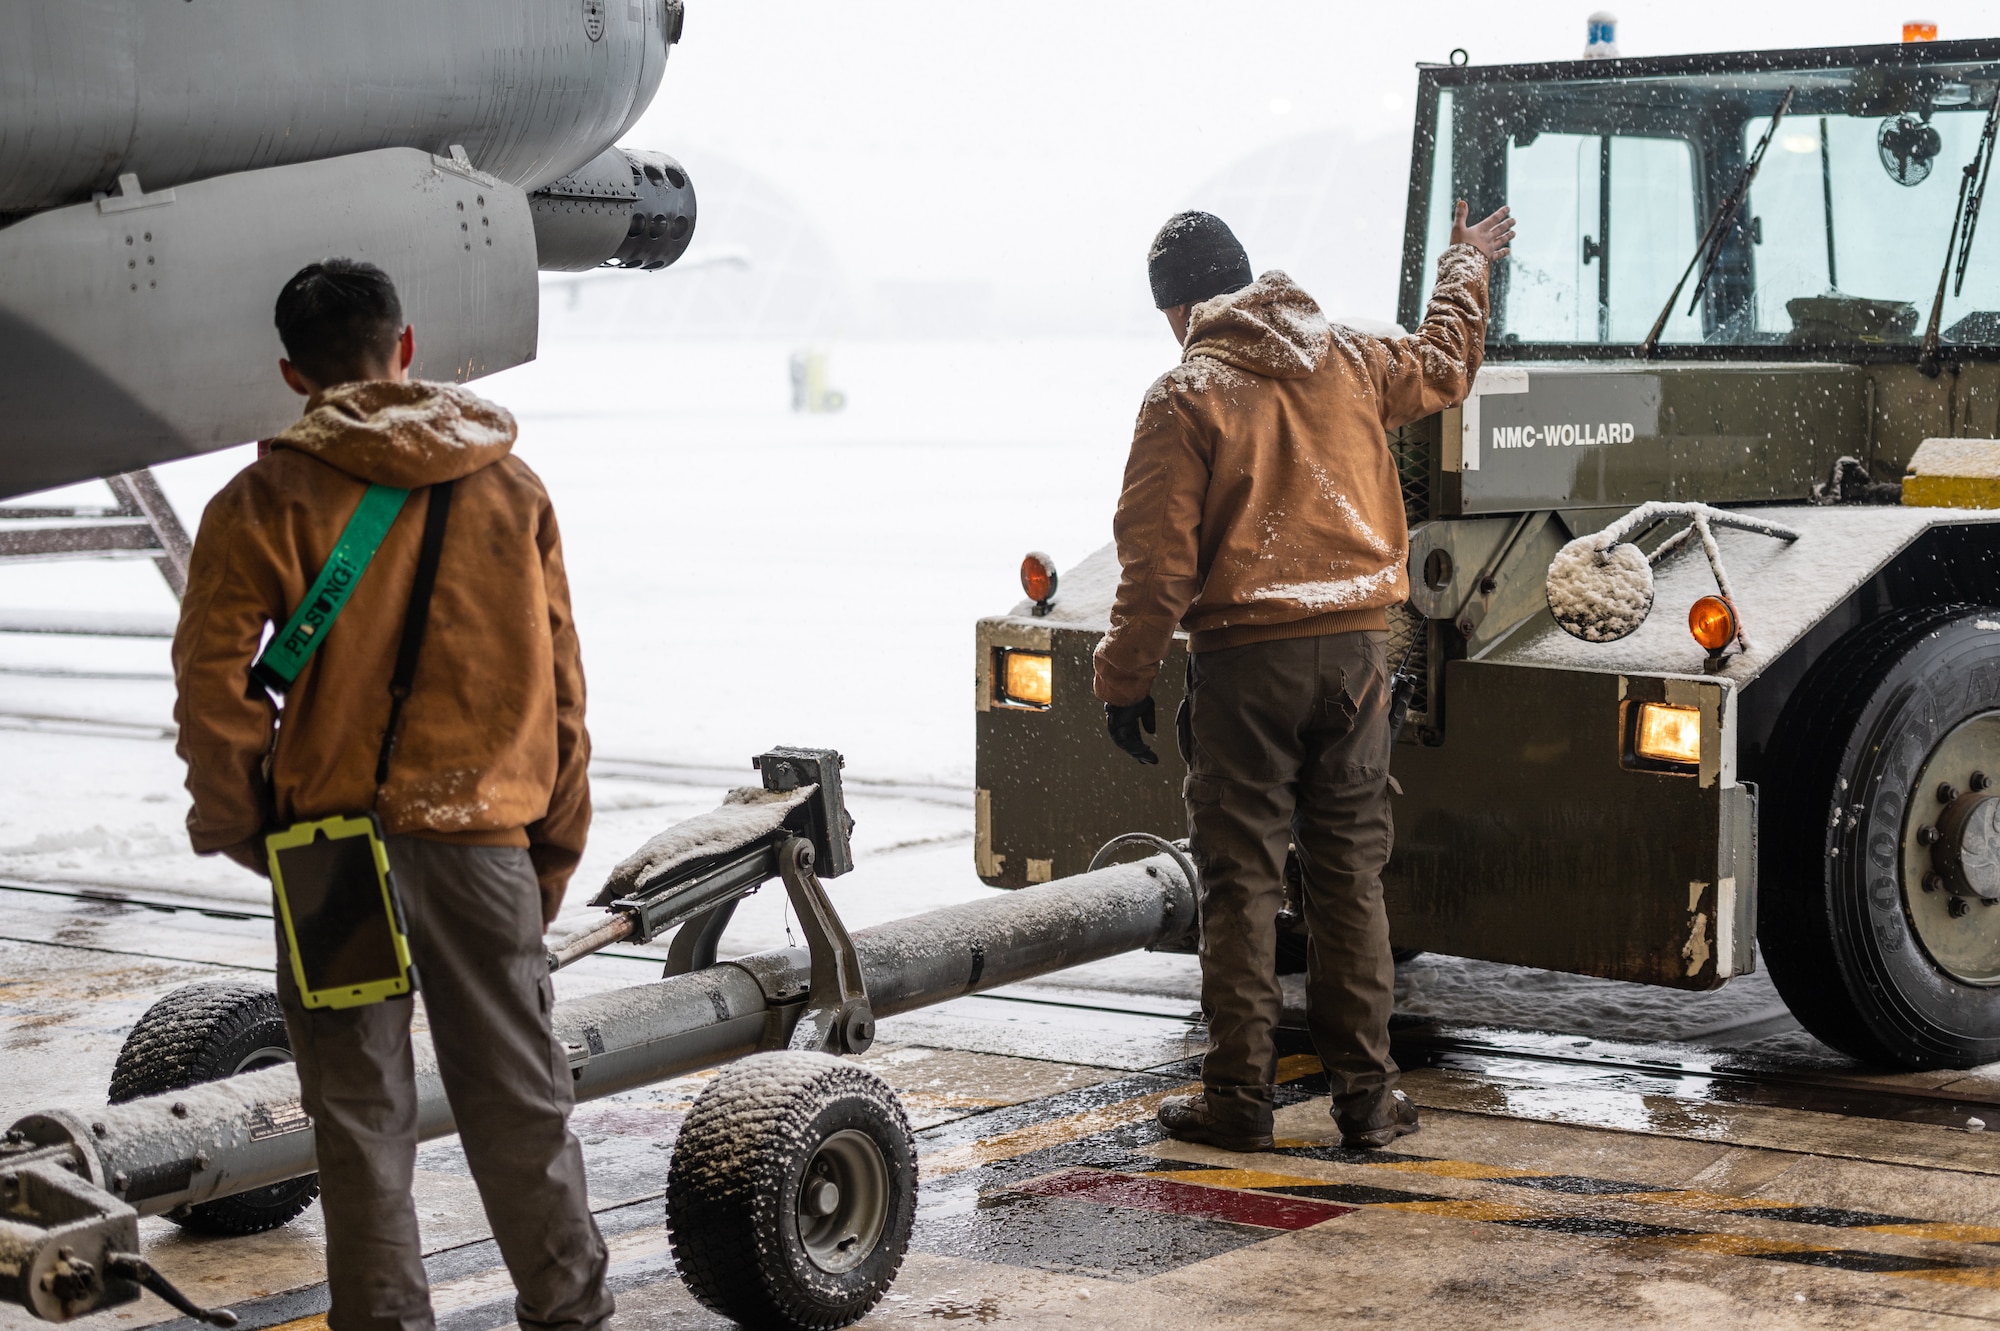 U.S. Air Force Staff Sgts. John-Michael Salenga and Manuel Baryon, 25th Fighter Generation Squadron crew chiefs, guide an aircraft tow vehicle while relocating an A-10C Thunderbolt II from the flightline to a hangar as part of an FGS training event